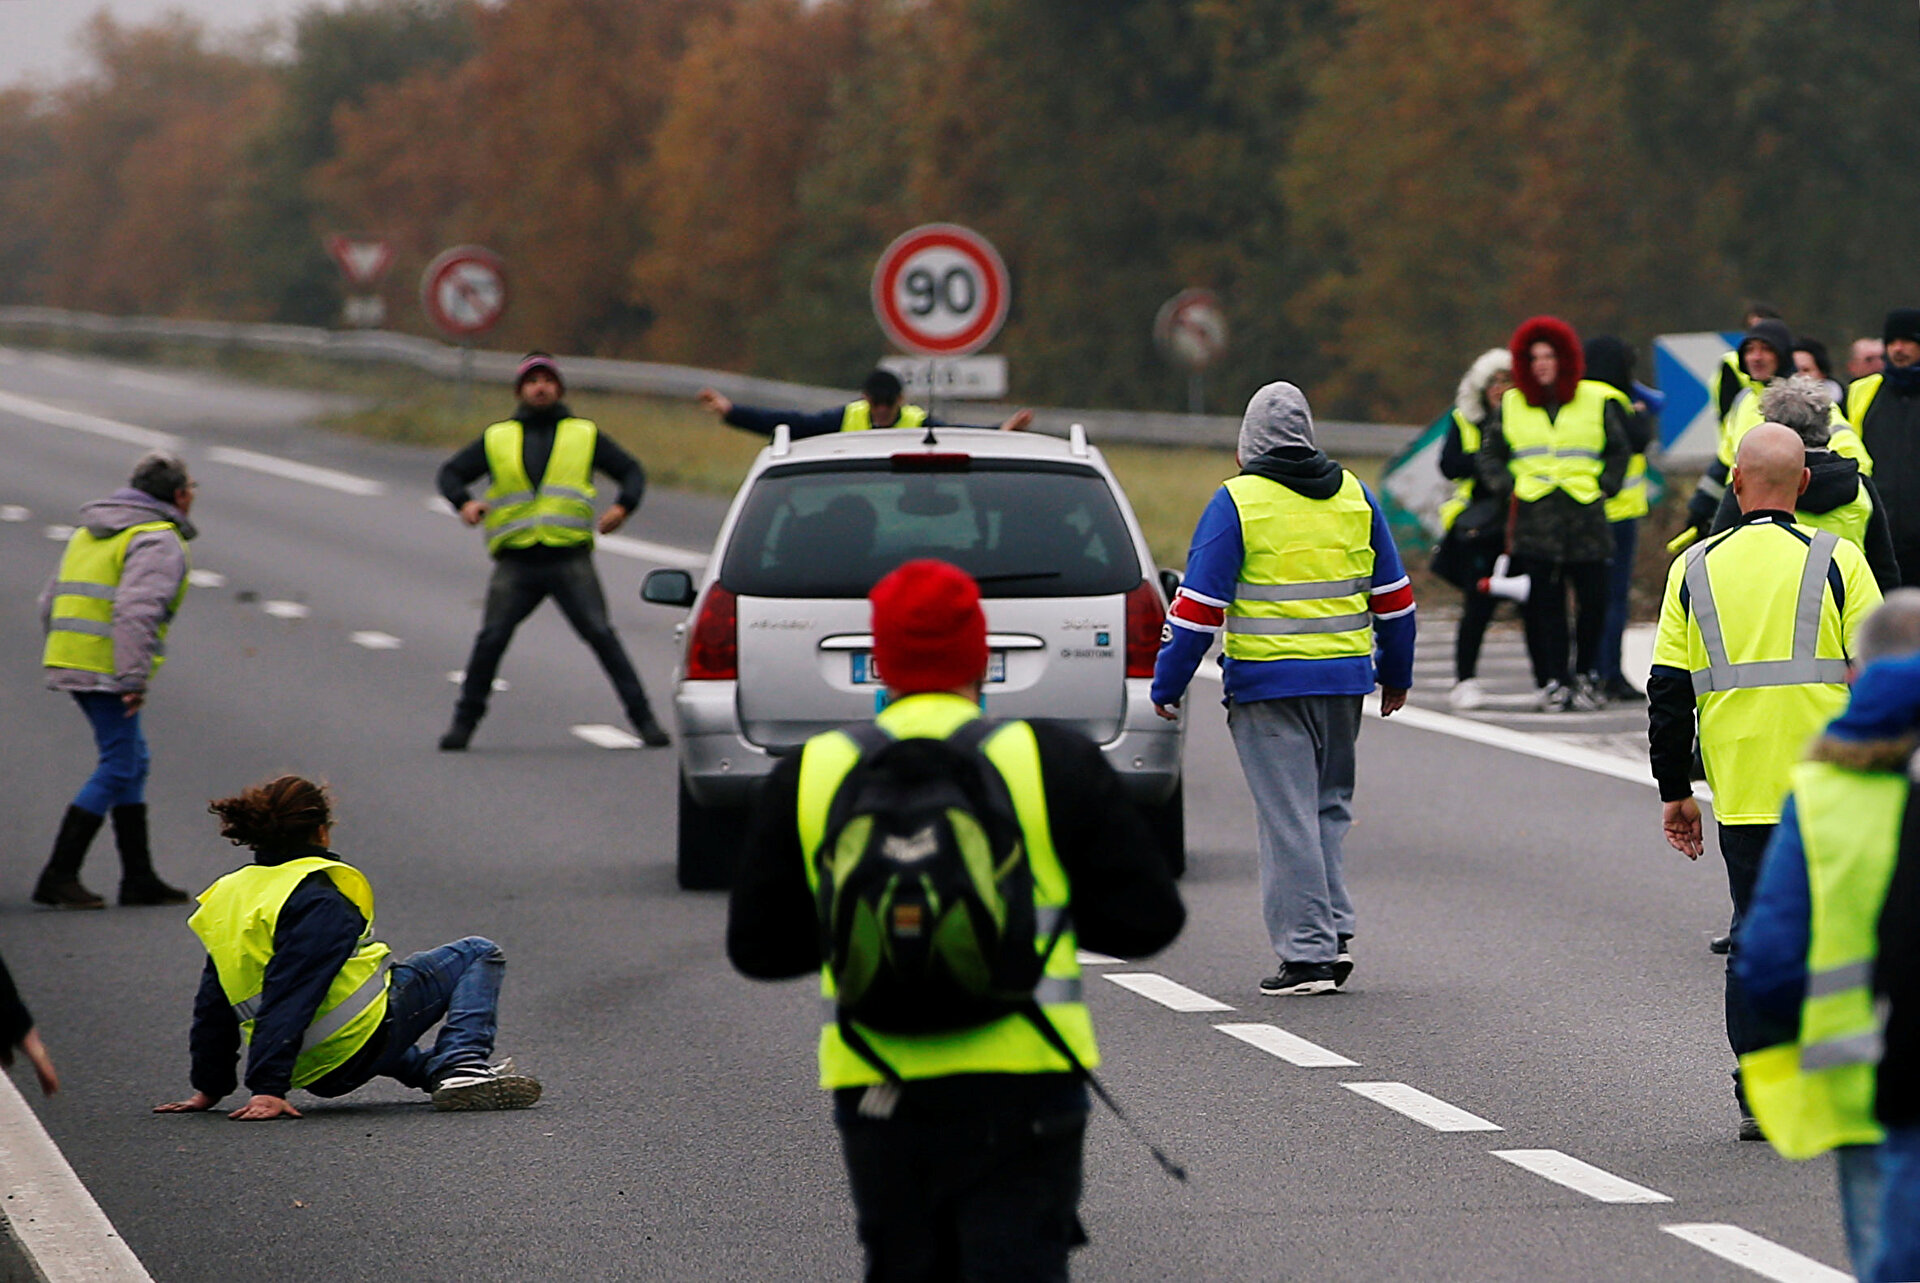 French drivers revolt against high fuel prices